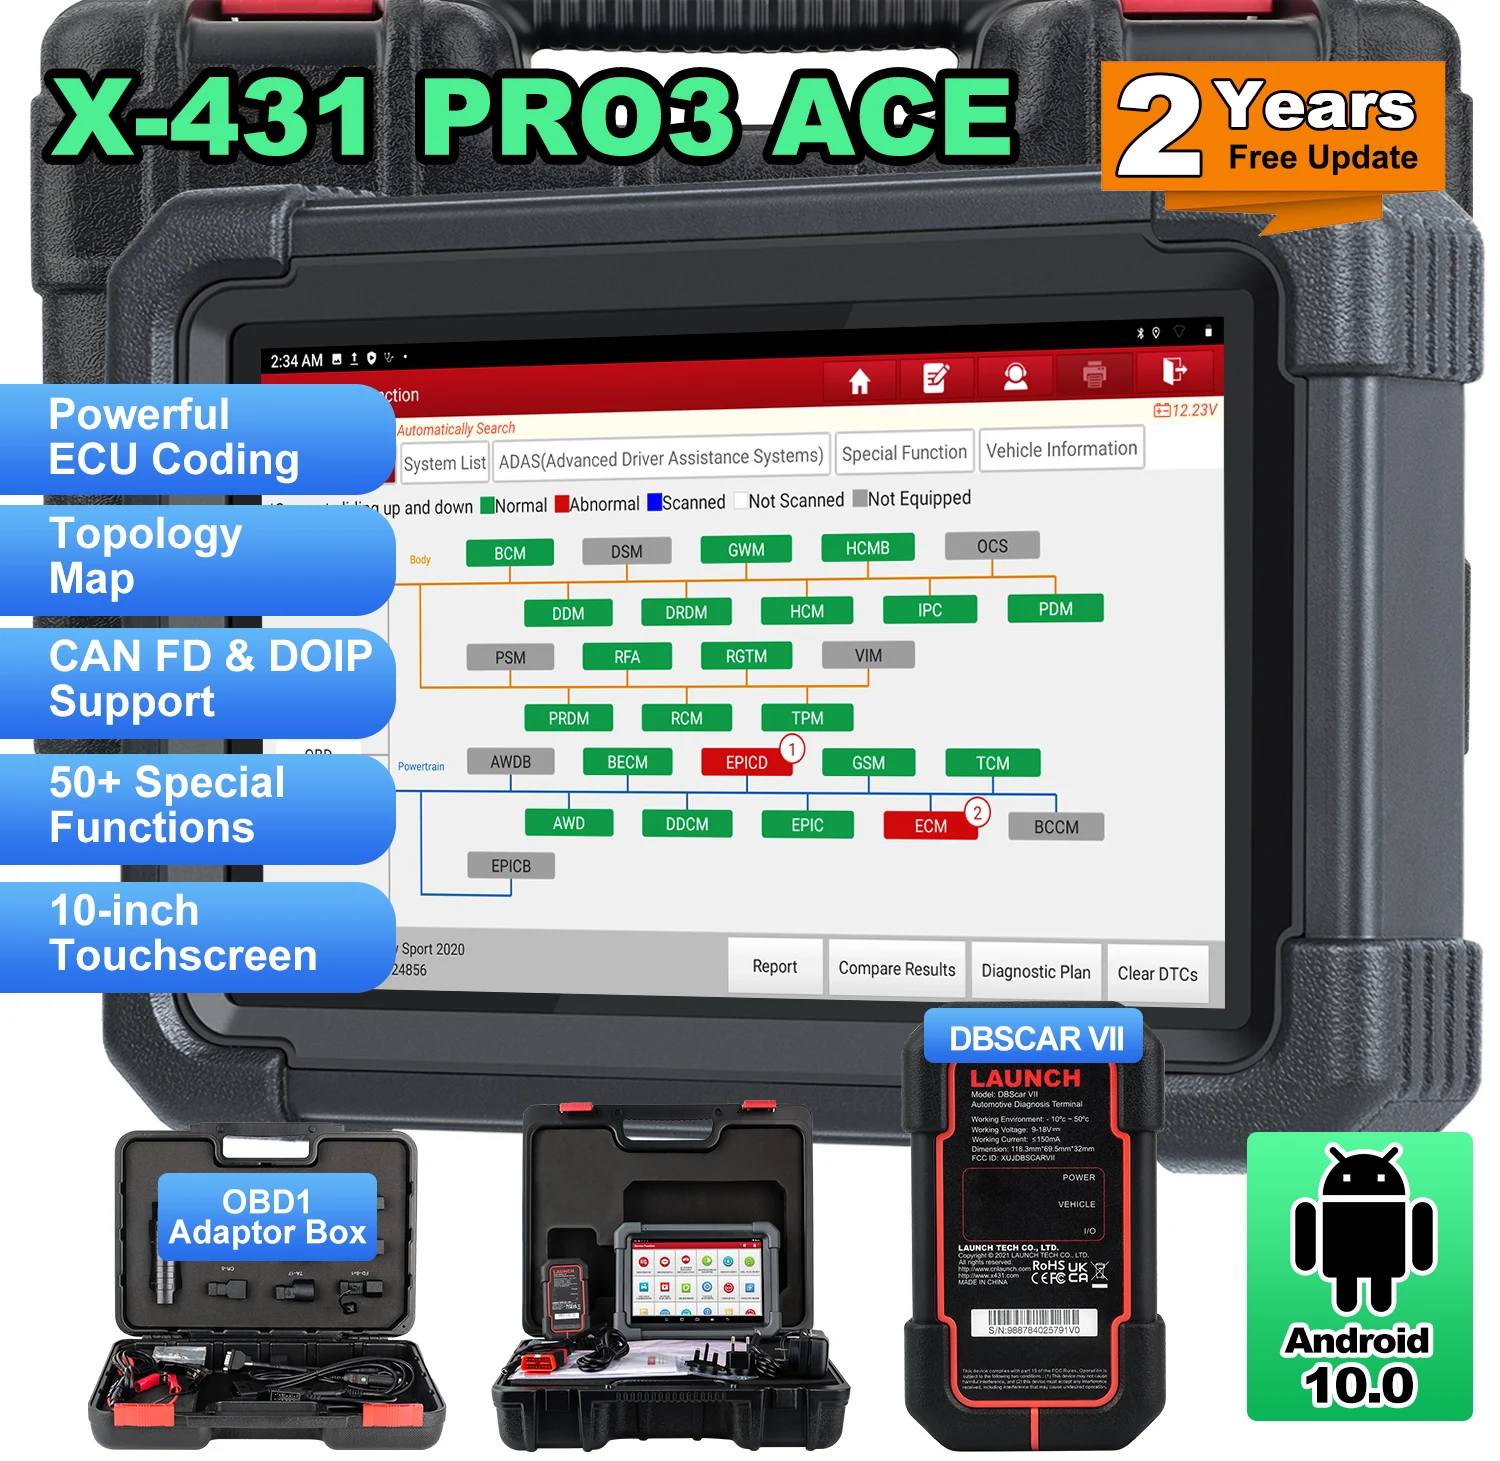 

Launch X431 PRO3 ACE Full System Bi-dierctional Control Car OBD2 Scanner CANFD DOIP Diagnostic Tool ECU Coding 2 Years Free